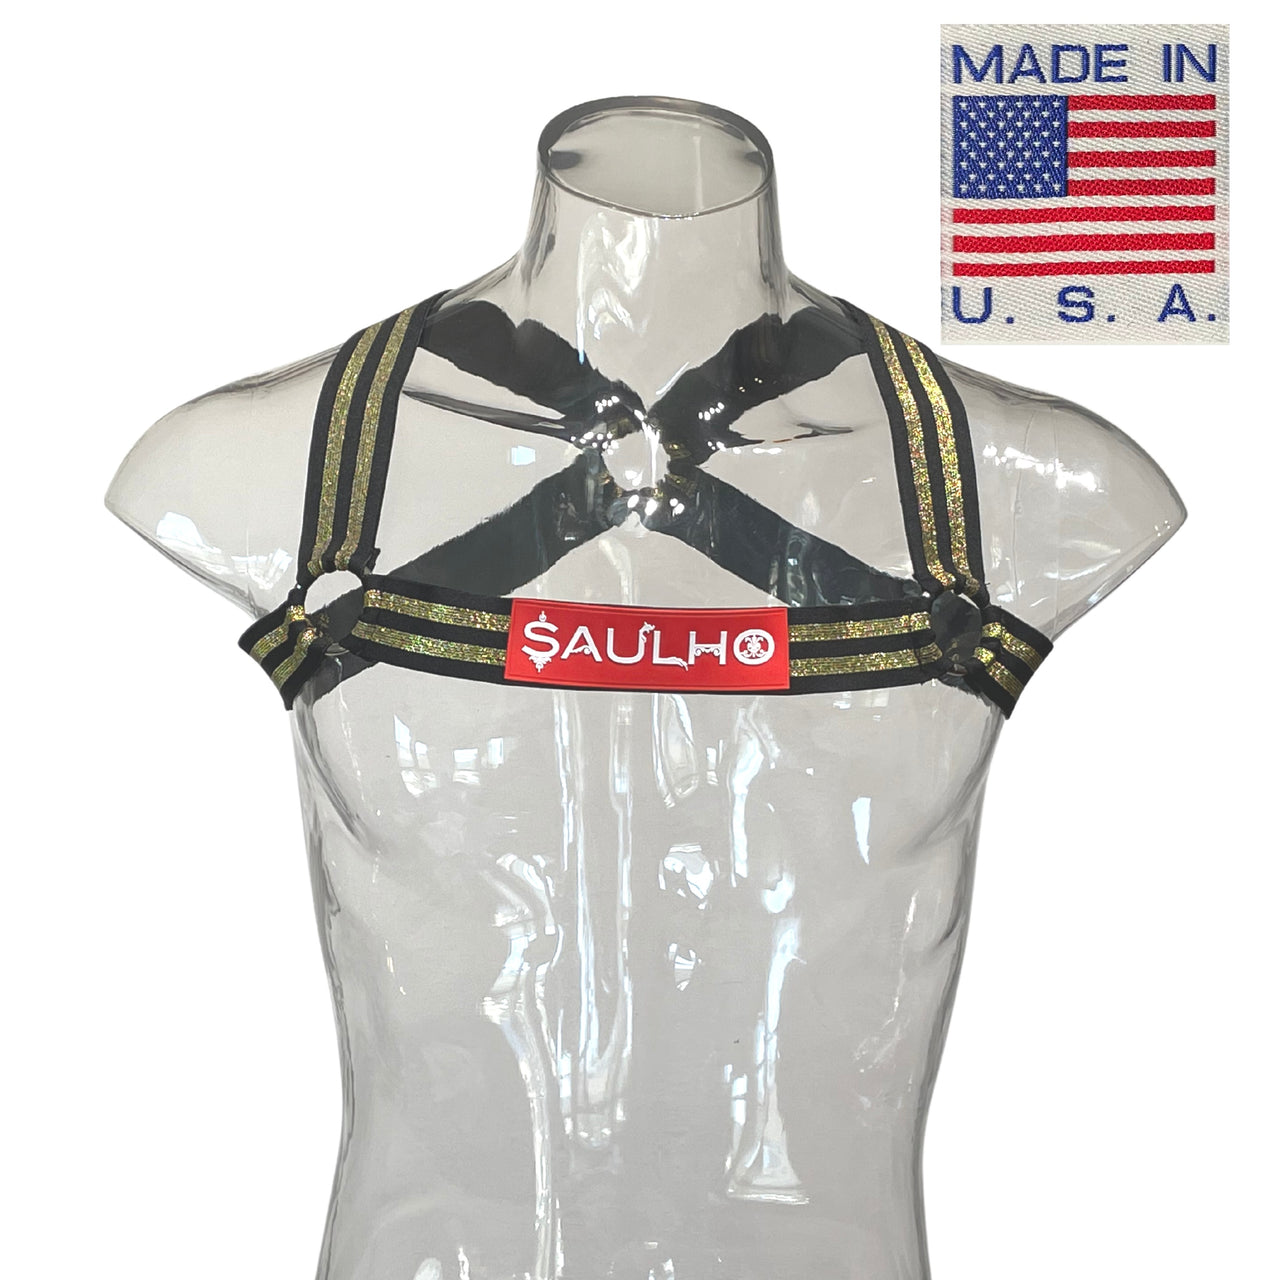 The Black and Gold Saulho Harness